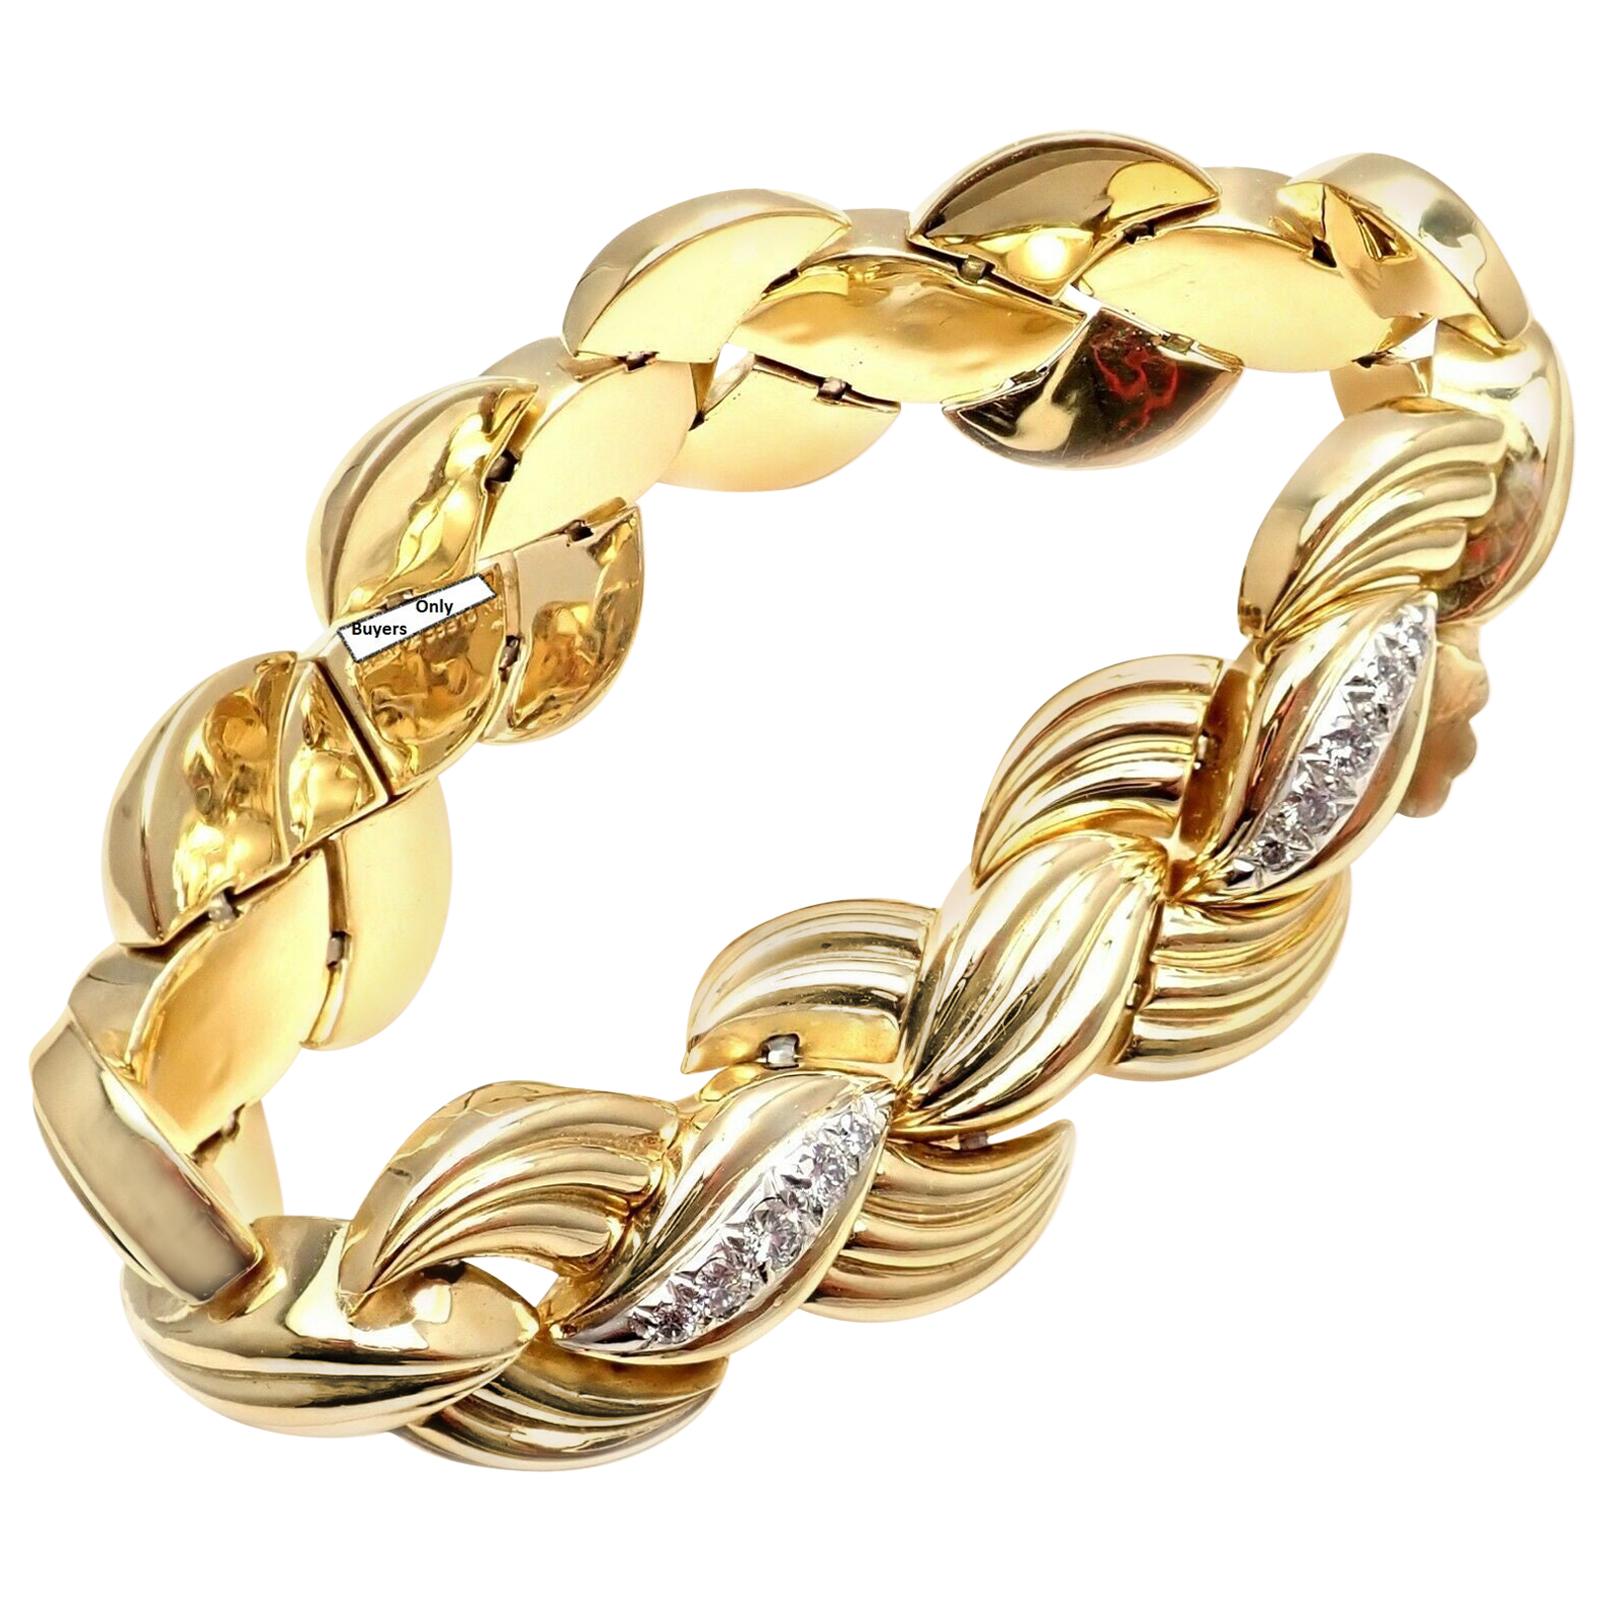 18k Yellow Gold Diamond Link Vintage Bracelet by Van Cleef & Arpels. 
With 25 round brilliant cut diamonds VS1 clarity, G color total weight approx. 1.75ctw
Details:
Length:  7.5